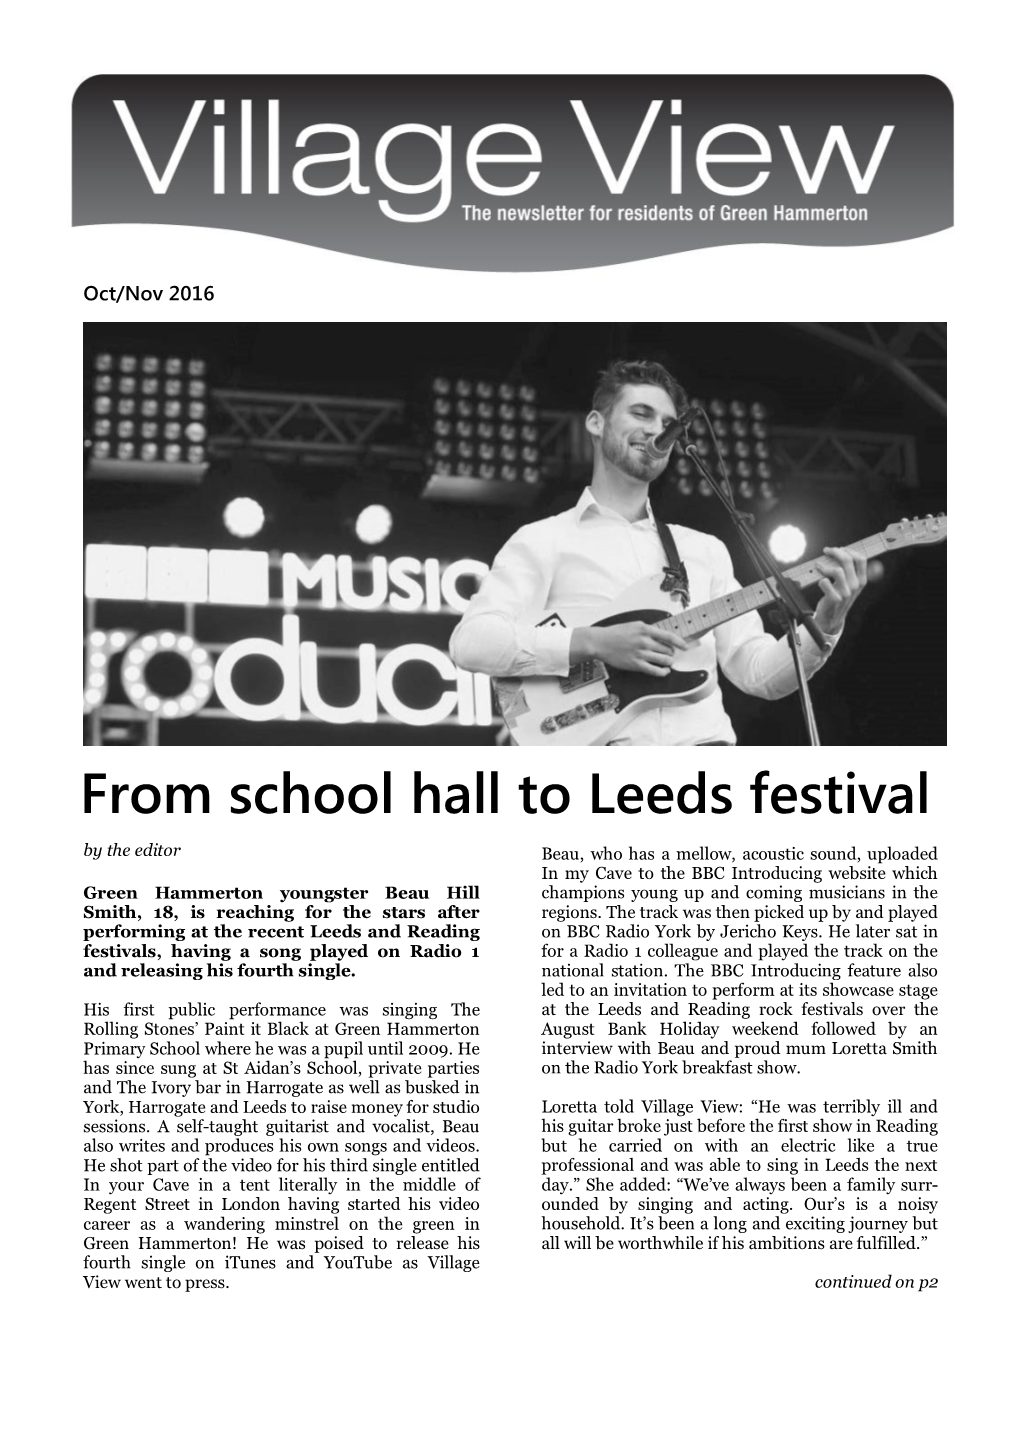 From School Hall to Leeds Festival